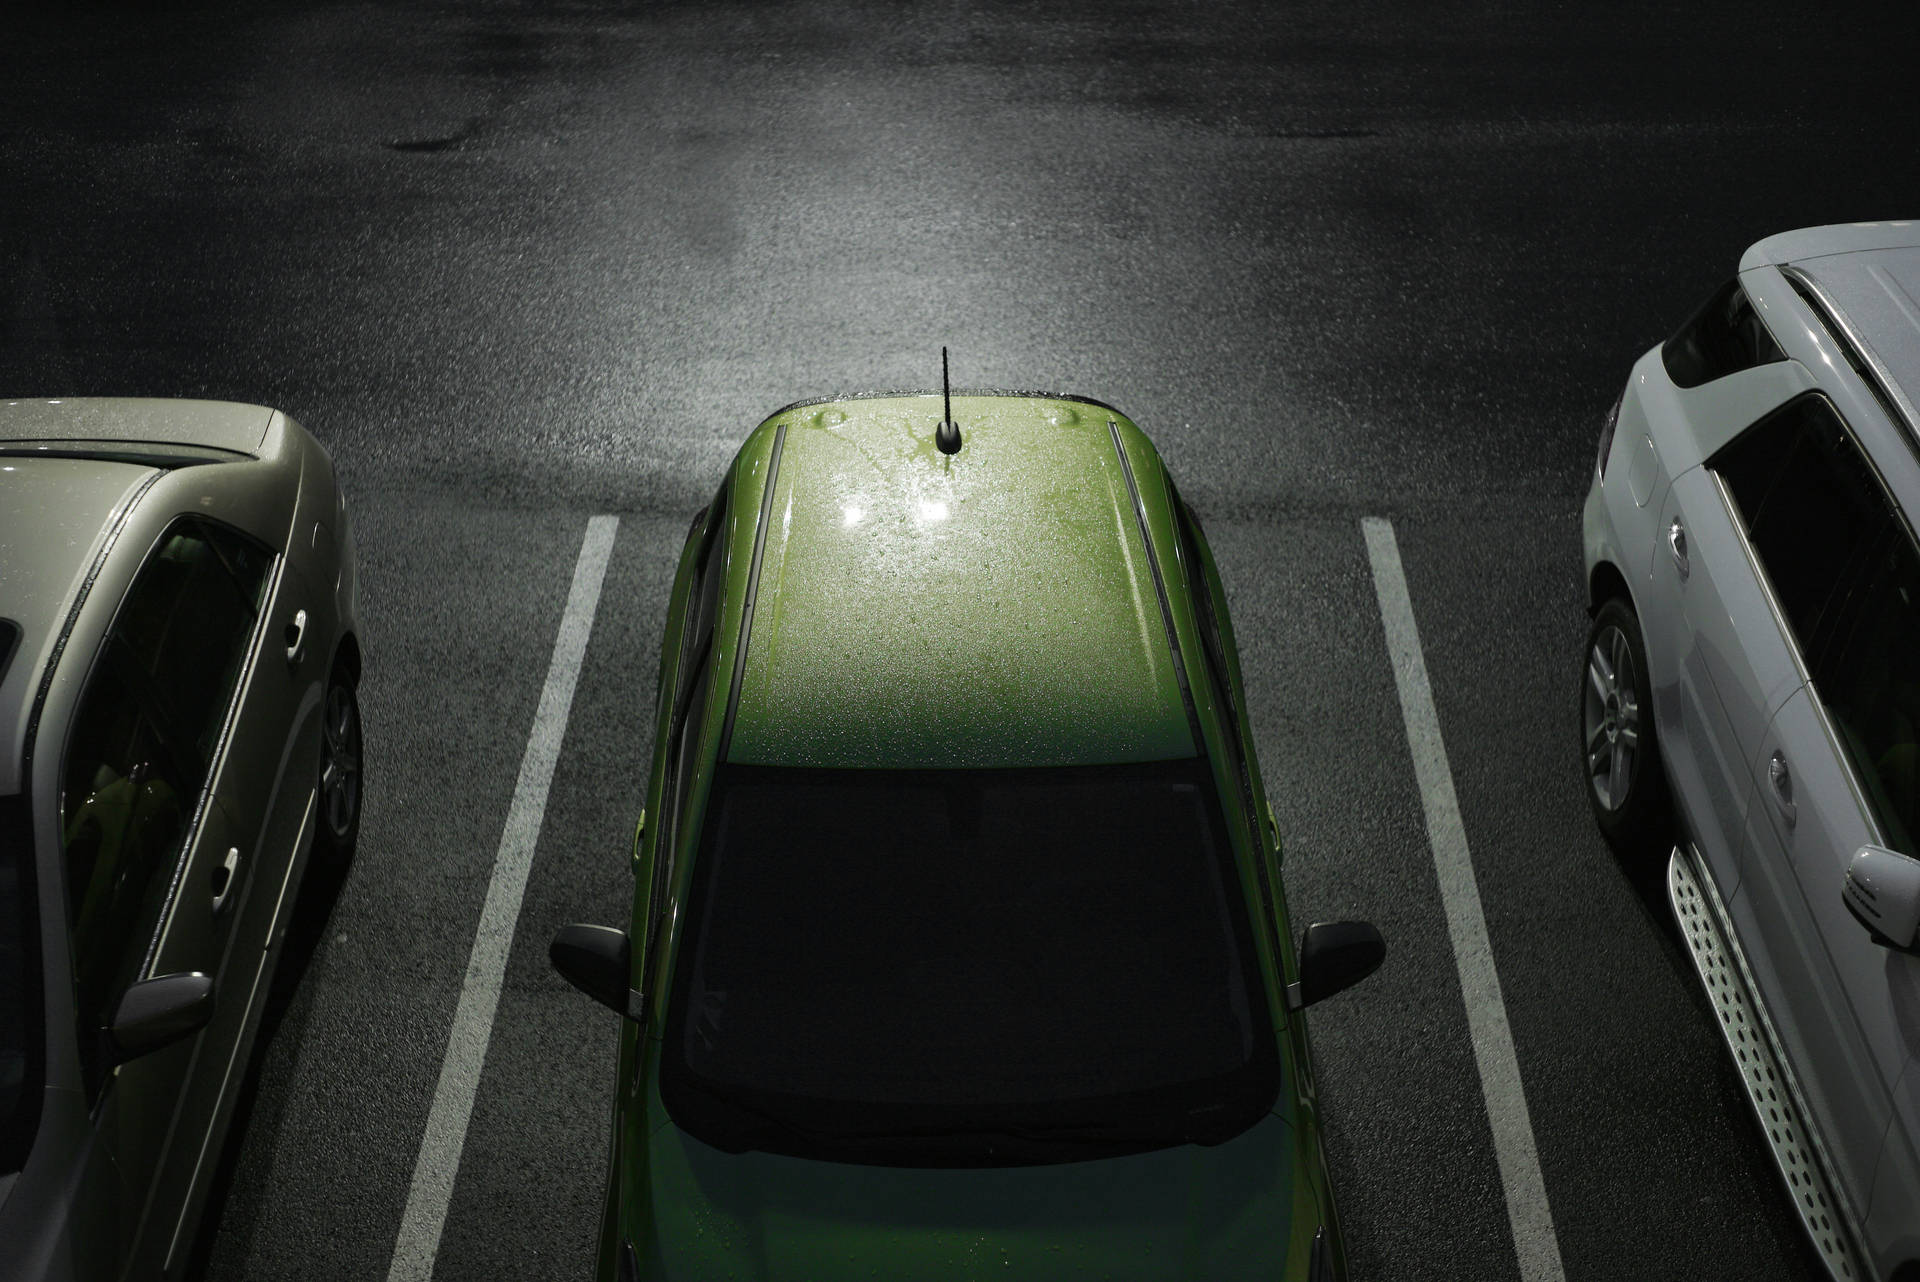 Hd Green Car Parked In Parking Lot Background